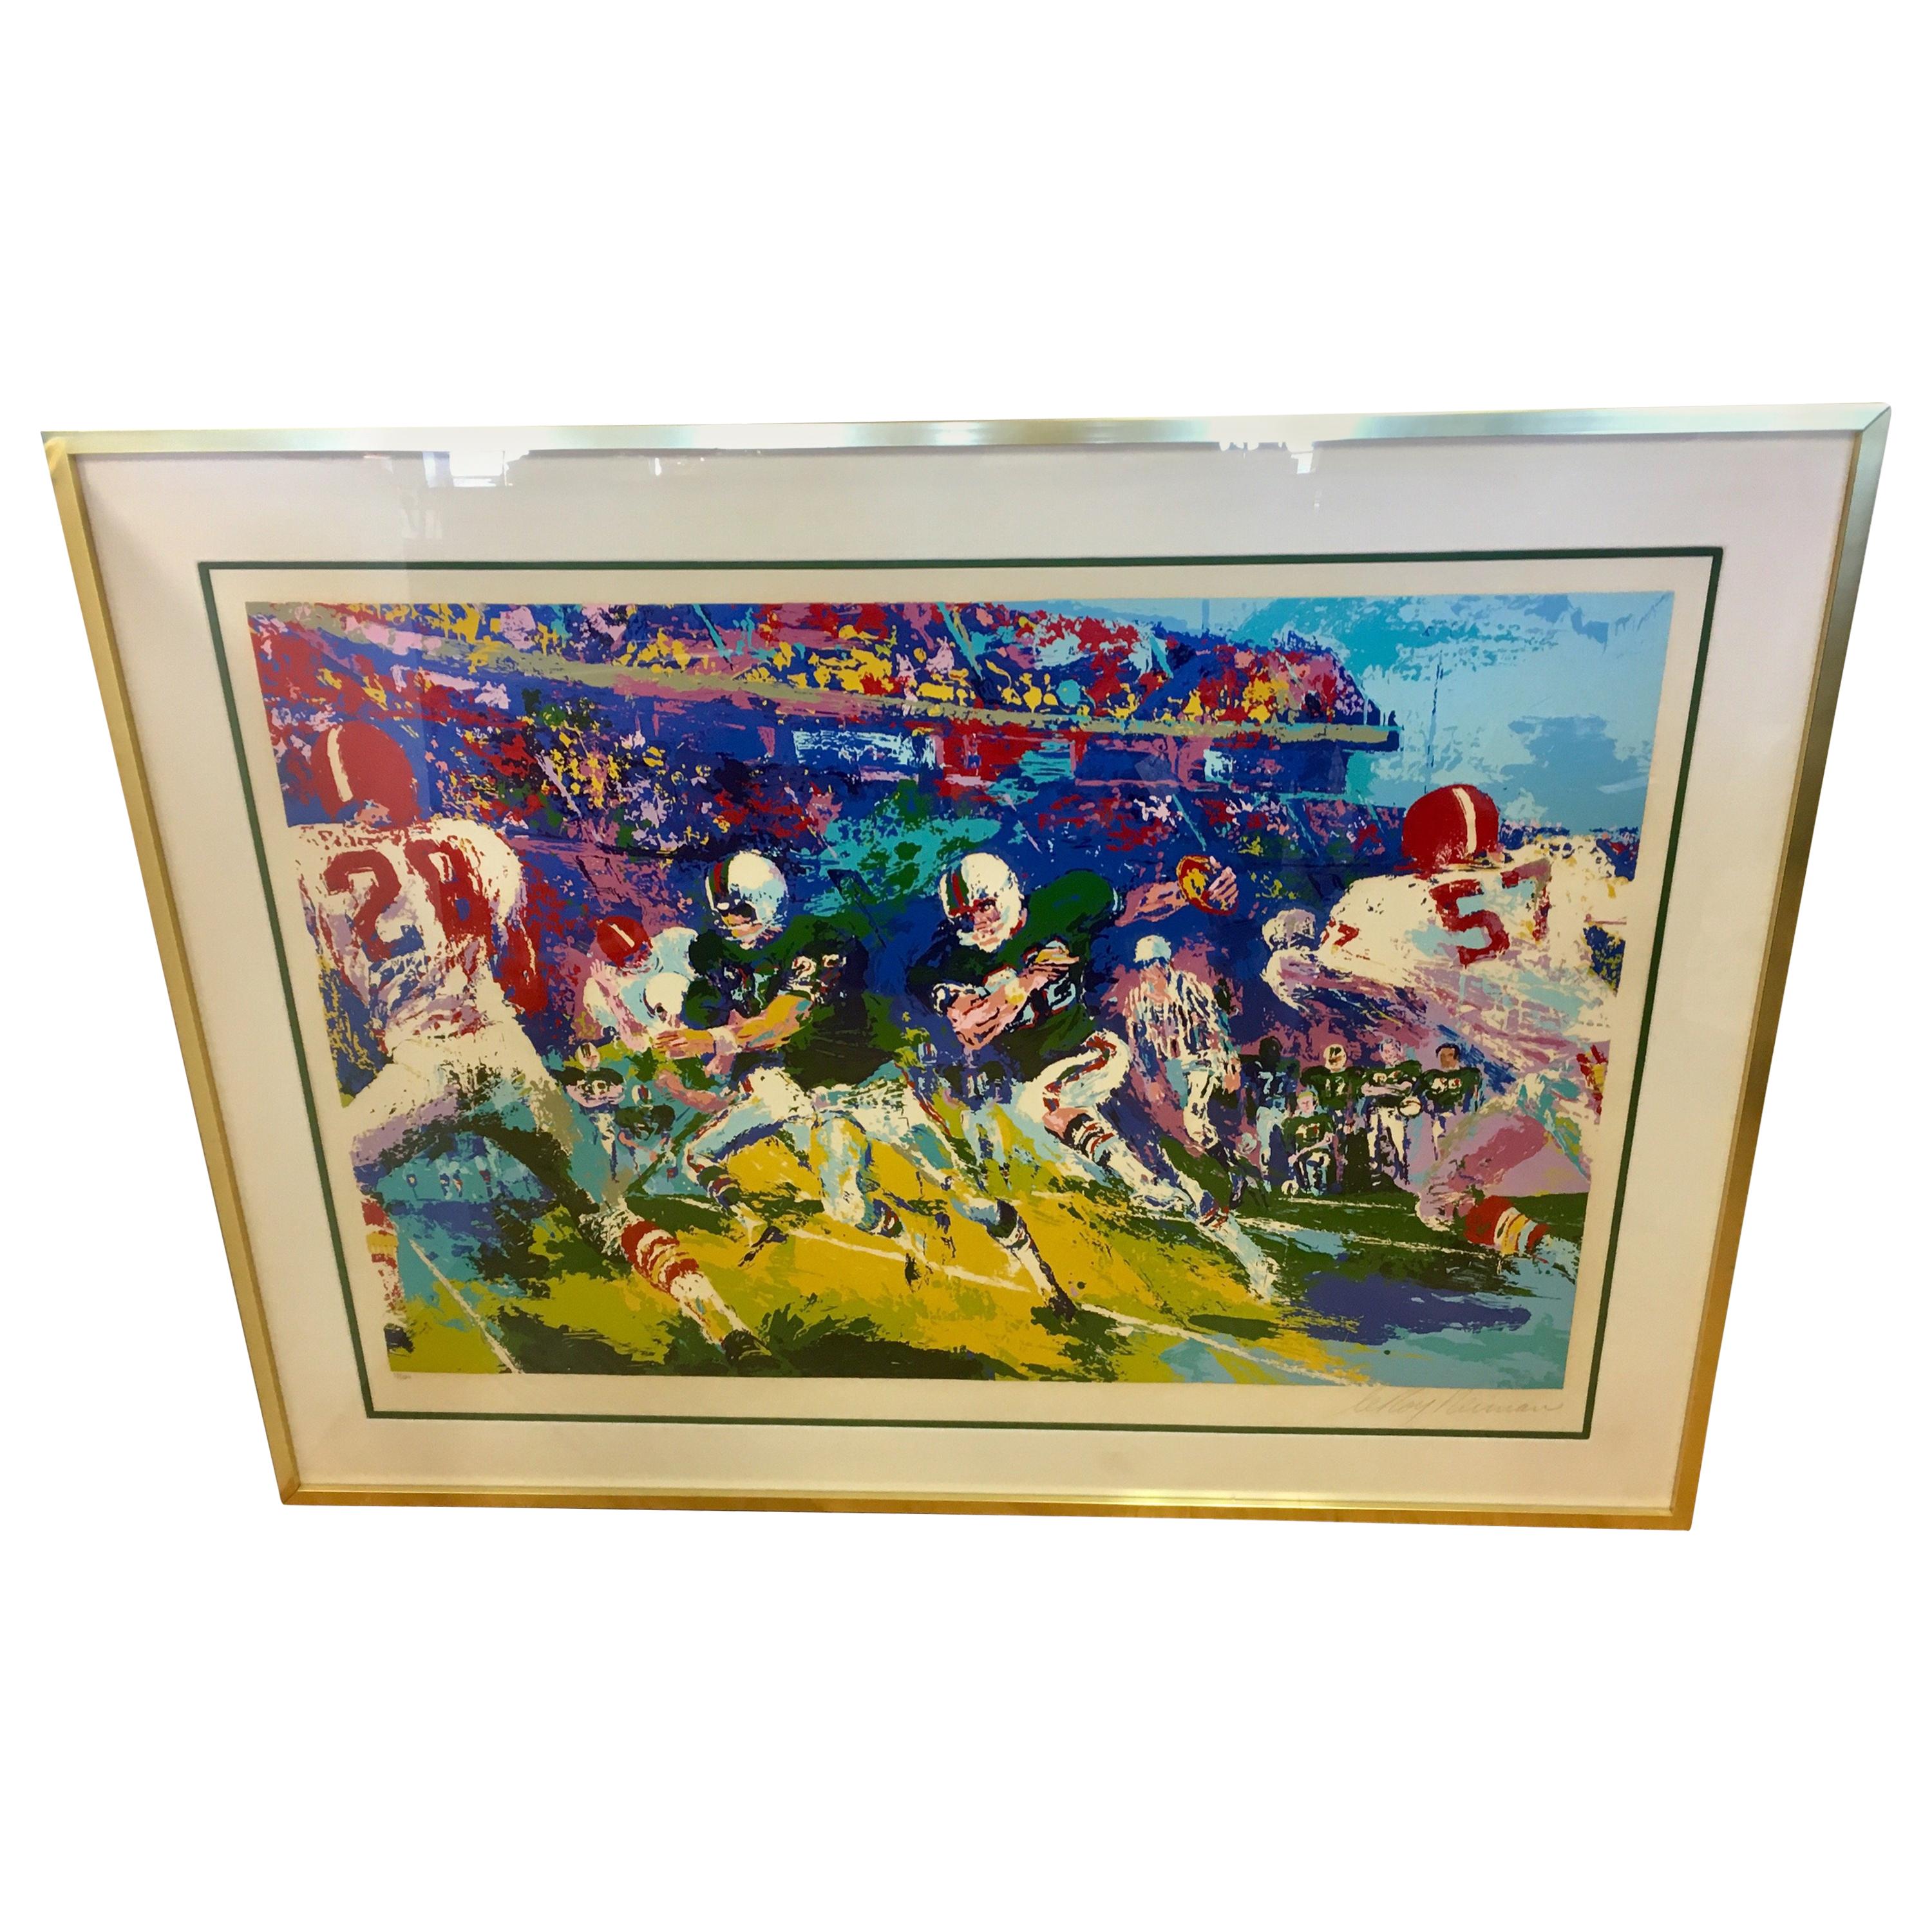 LeRoy Neiman Signed & Numbered Large Serigraph Limited Edition Gridiron Football